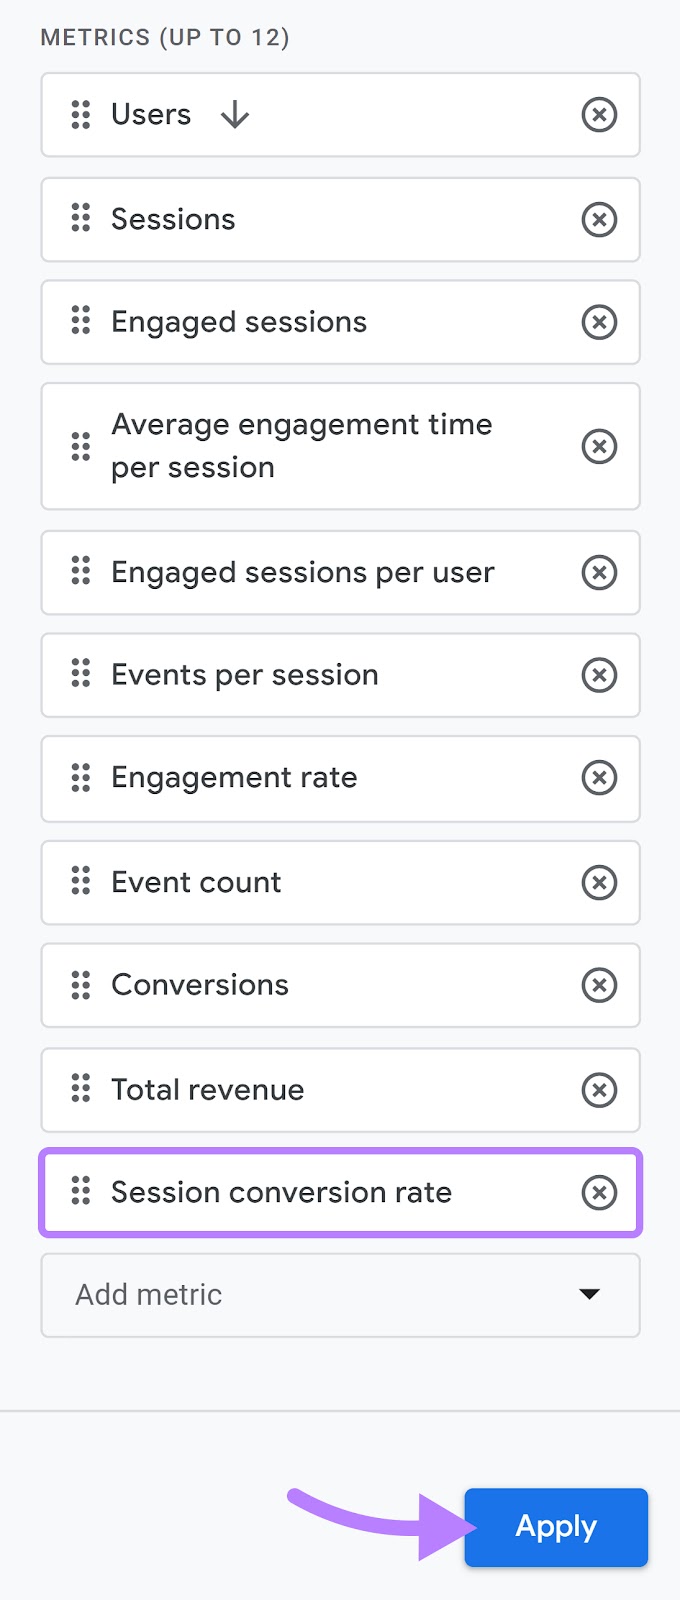 “Session conversion rate” option selected from the metrics list